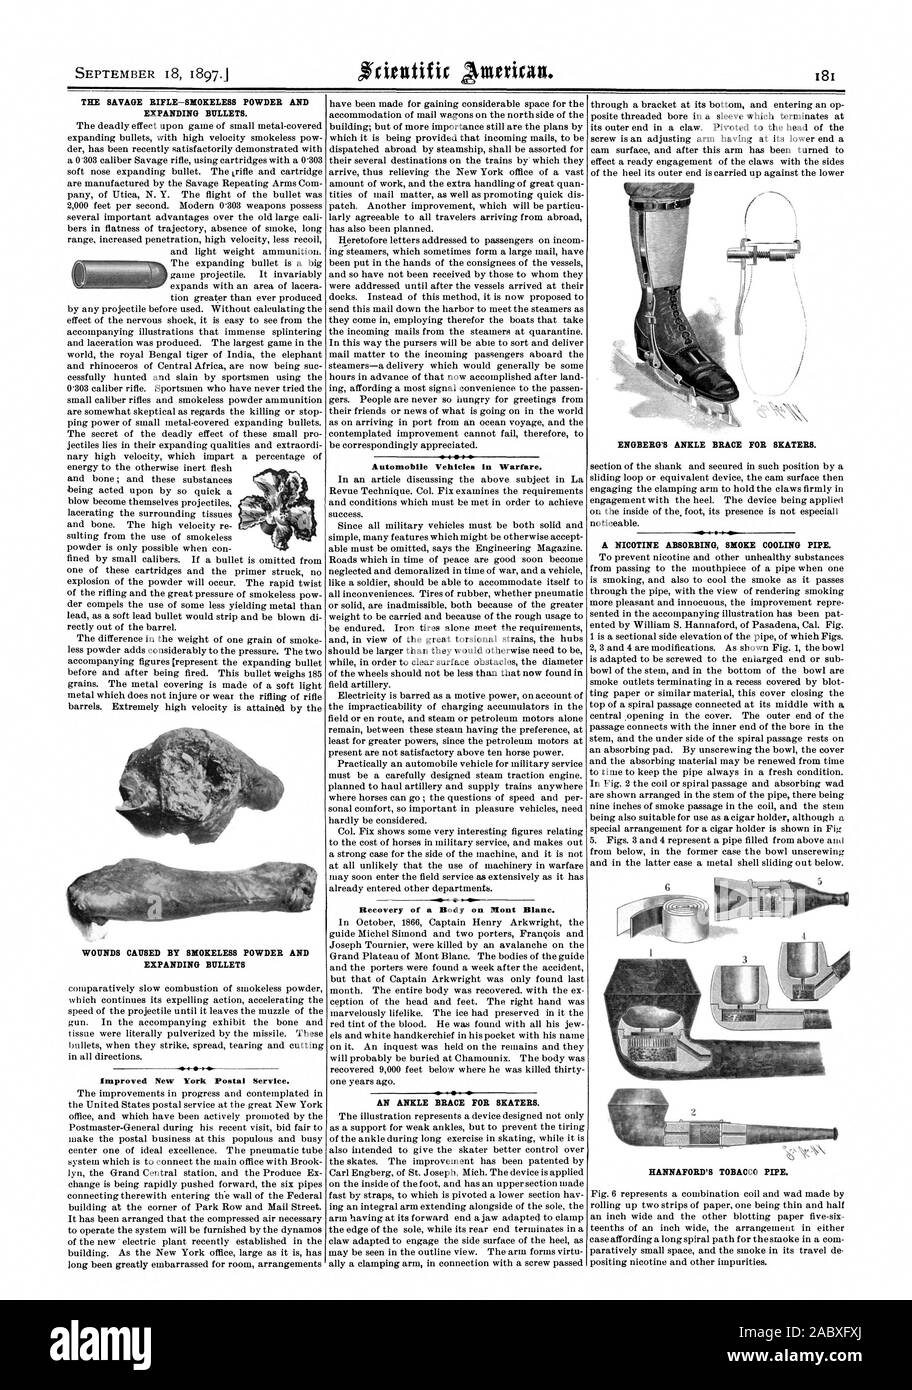 THE SAVAGE RIFLE—SMOKELESS POWDER AND EXPANDING BULLETS. WOUNDS CAUSED BY SMOKELESS POWDER AND EXPANDING BULLETS .-40 Improved New York Postal Service. Automobile Vehicles in Warfare. Recovery of a Body on Mont Blanc. AN ANKLE BRACE FOR SKATERS. ENGBERG'S ANKLE BRACE FOR SKATERS. A NICOTINE ABSORBING SMOKE COOLING PIPE. HANNAFORD'S TOBACCO PIPE., scientific american, 1897-09-18 Stock Photo